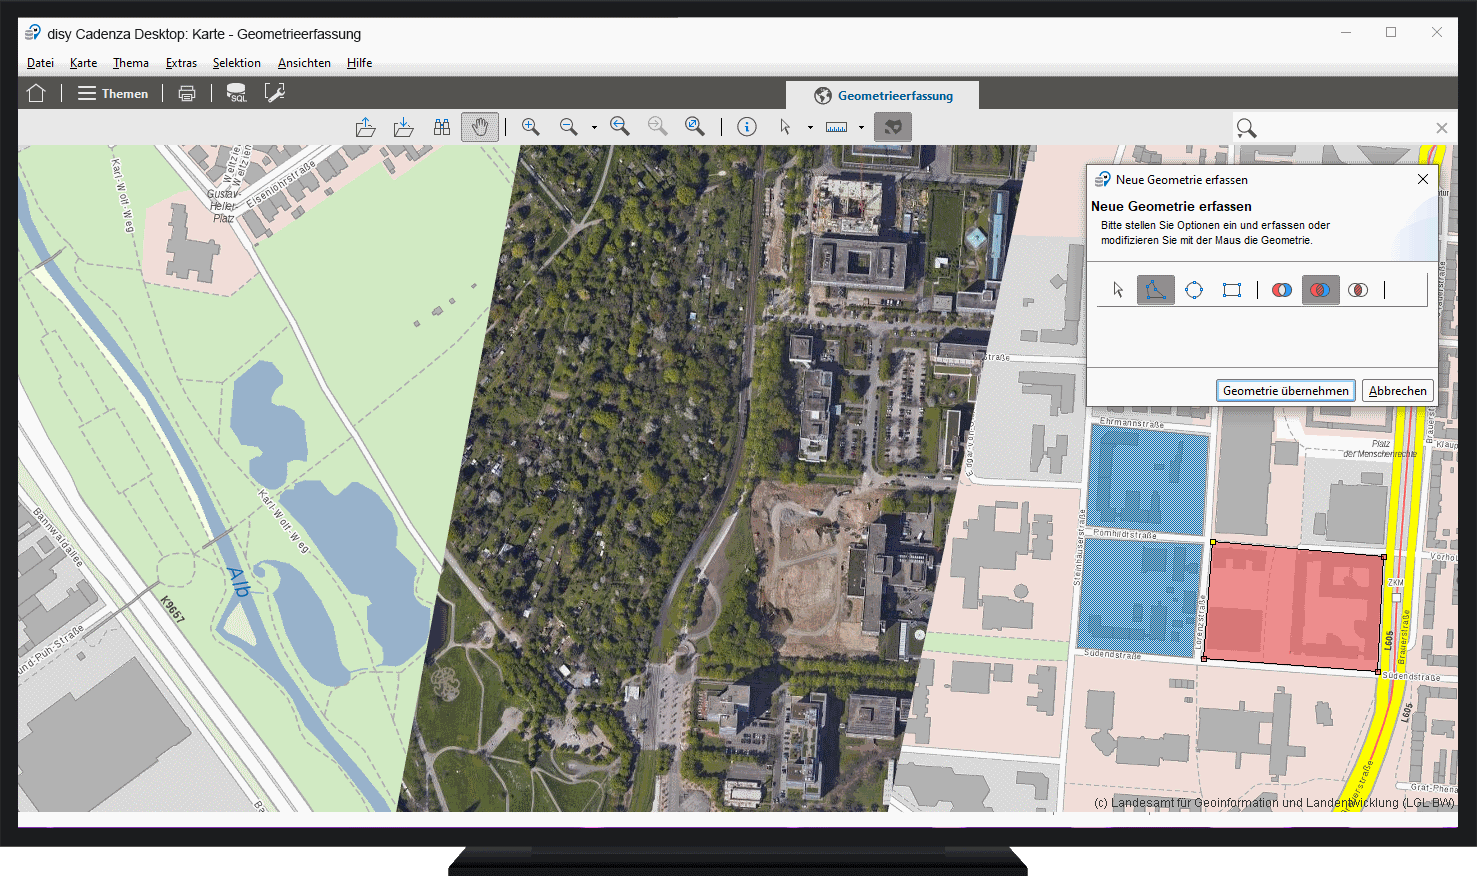 Using the functionality of a GIS in Cadenza